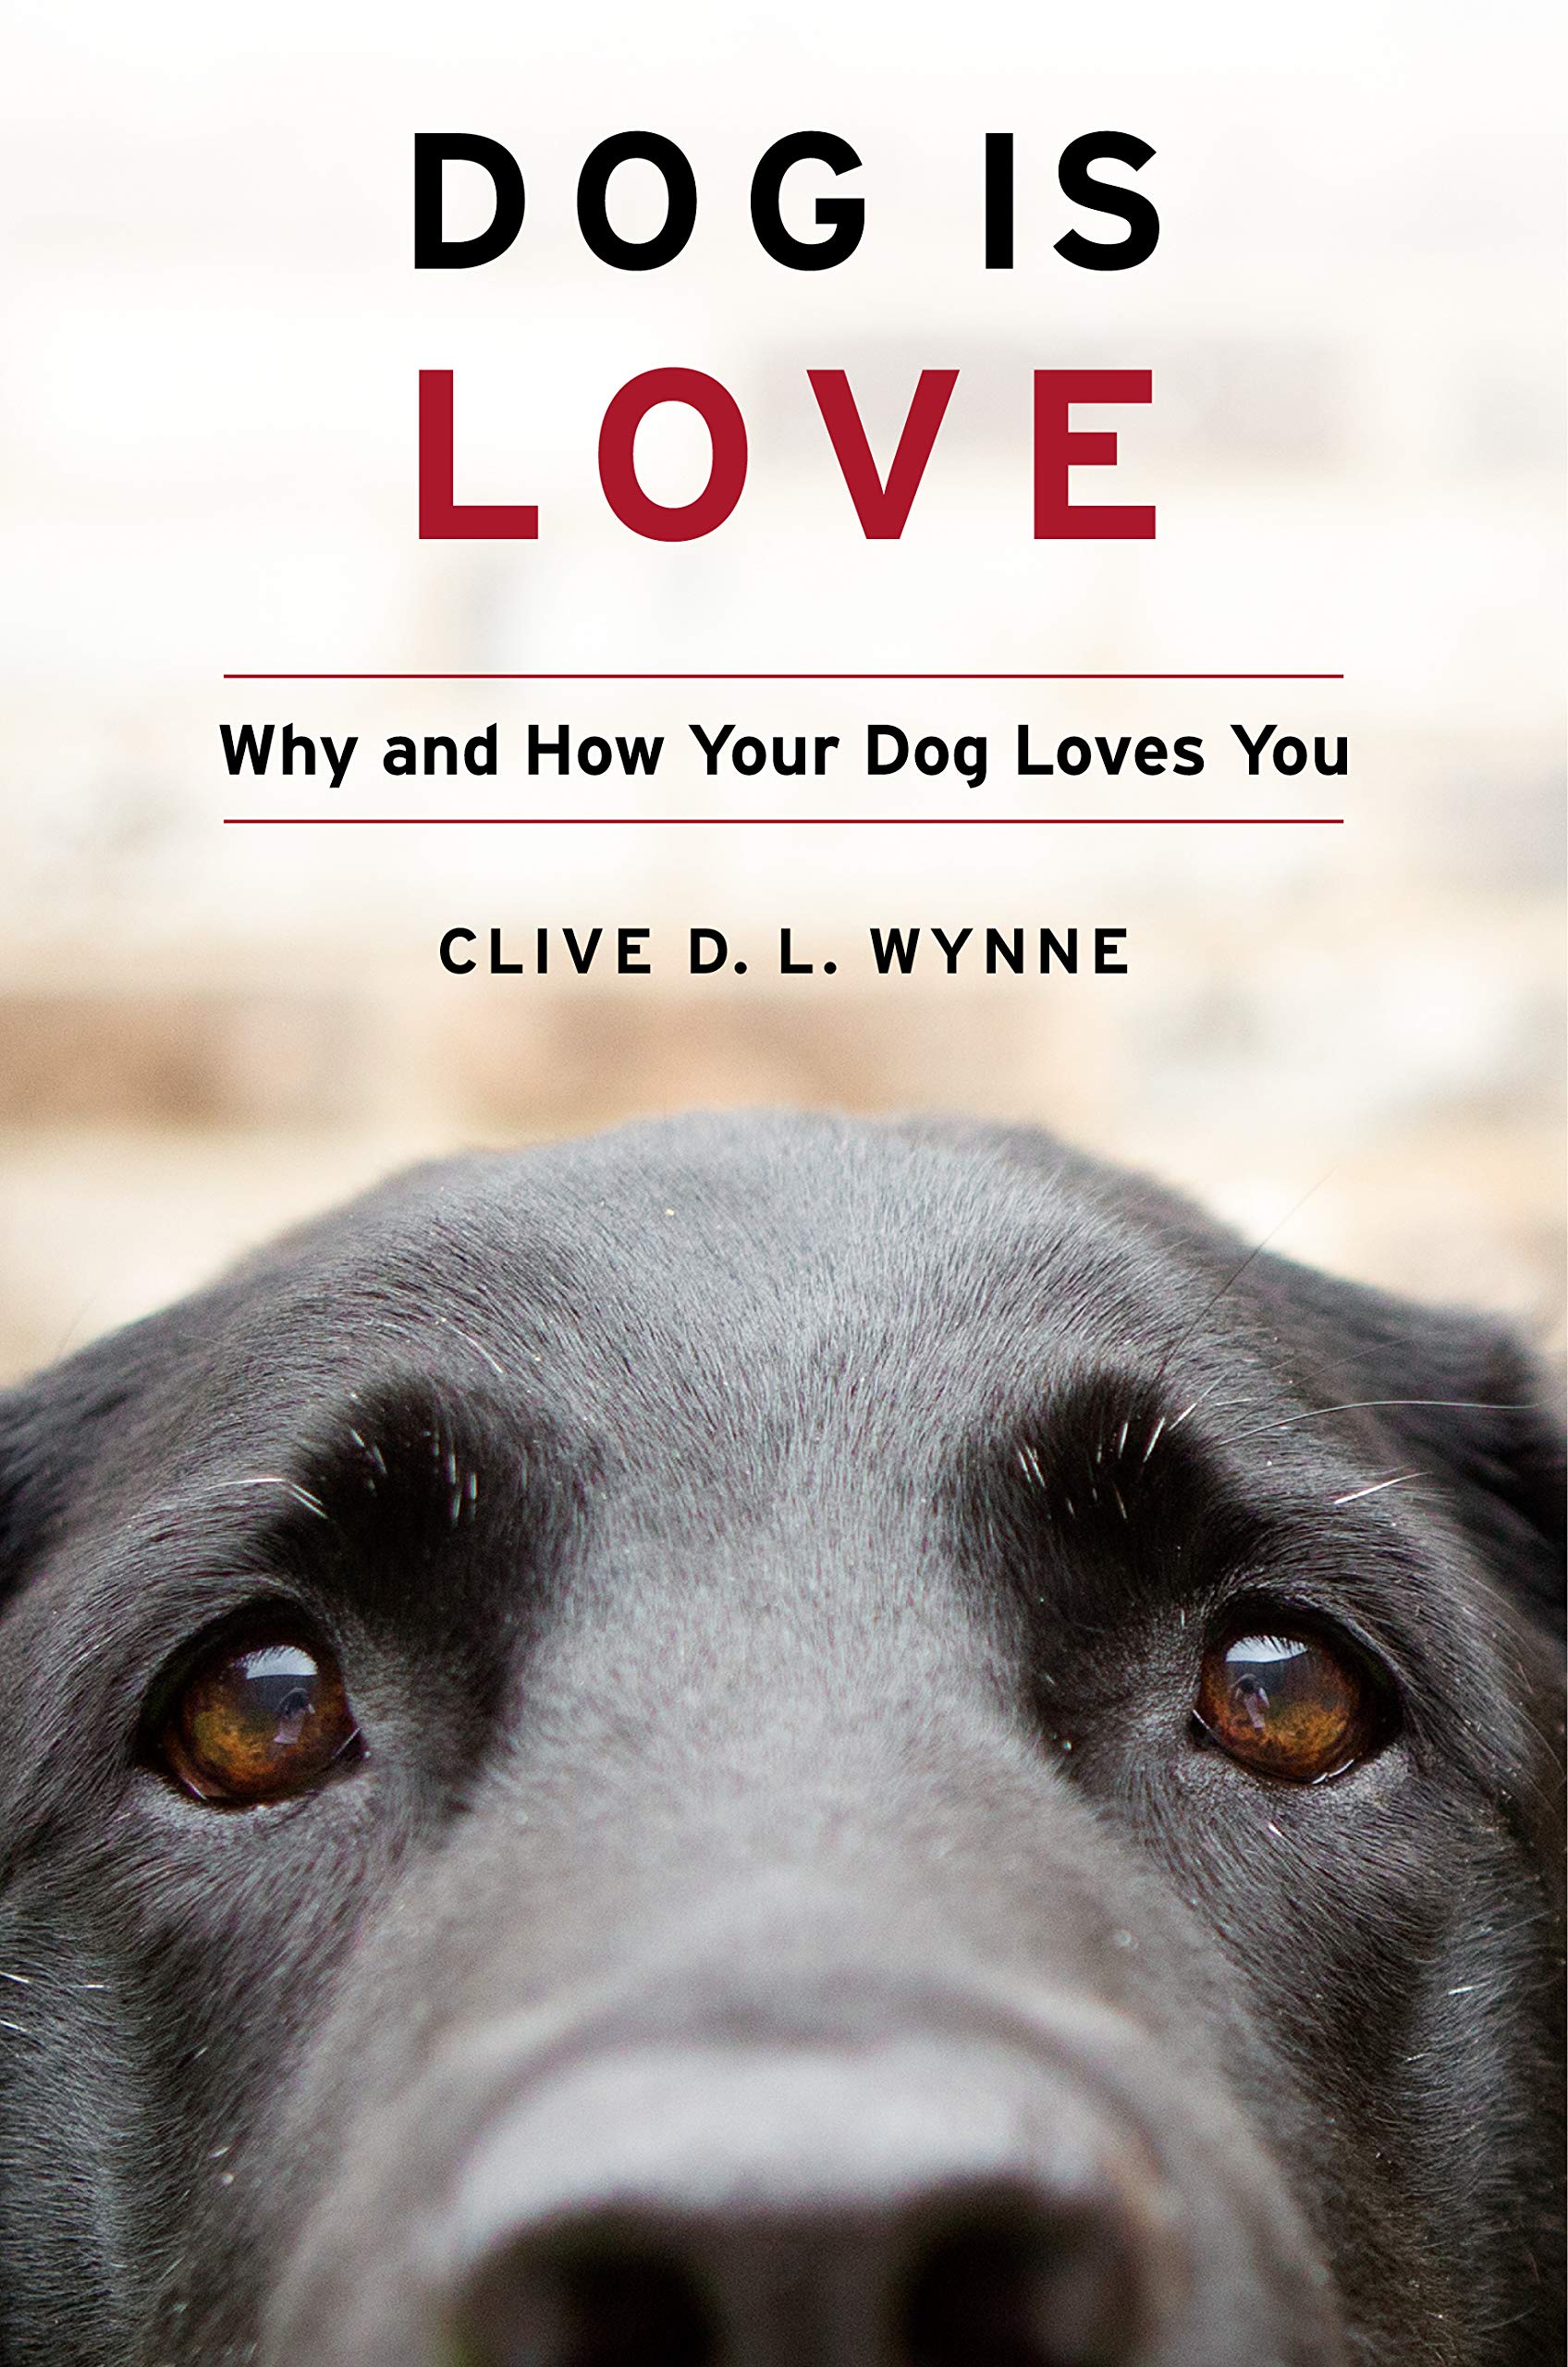 Cover of "Dog Is Love" by Clive Wynne